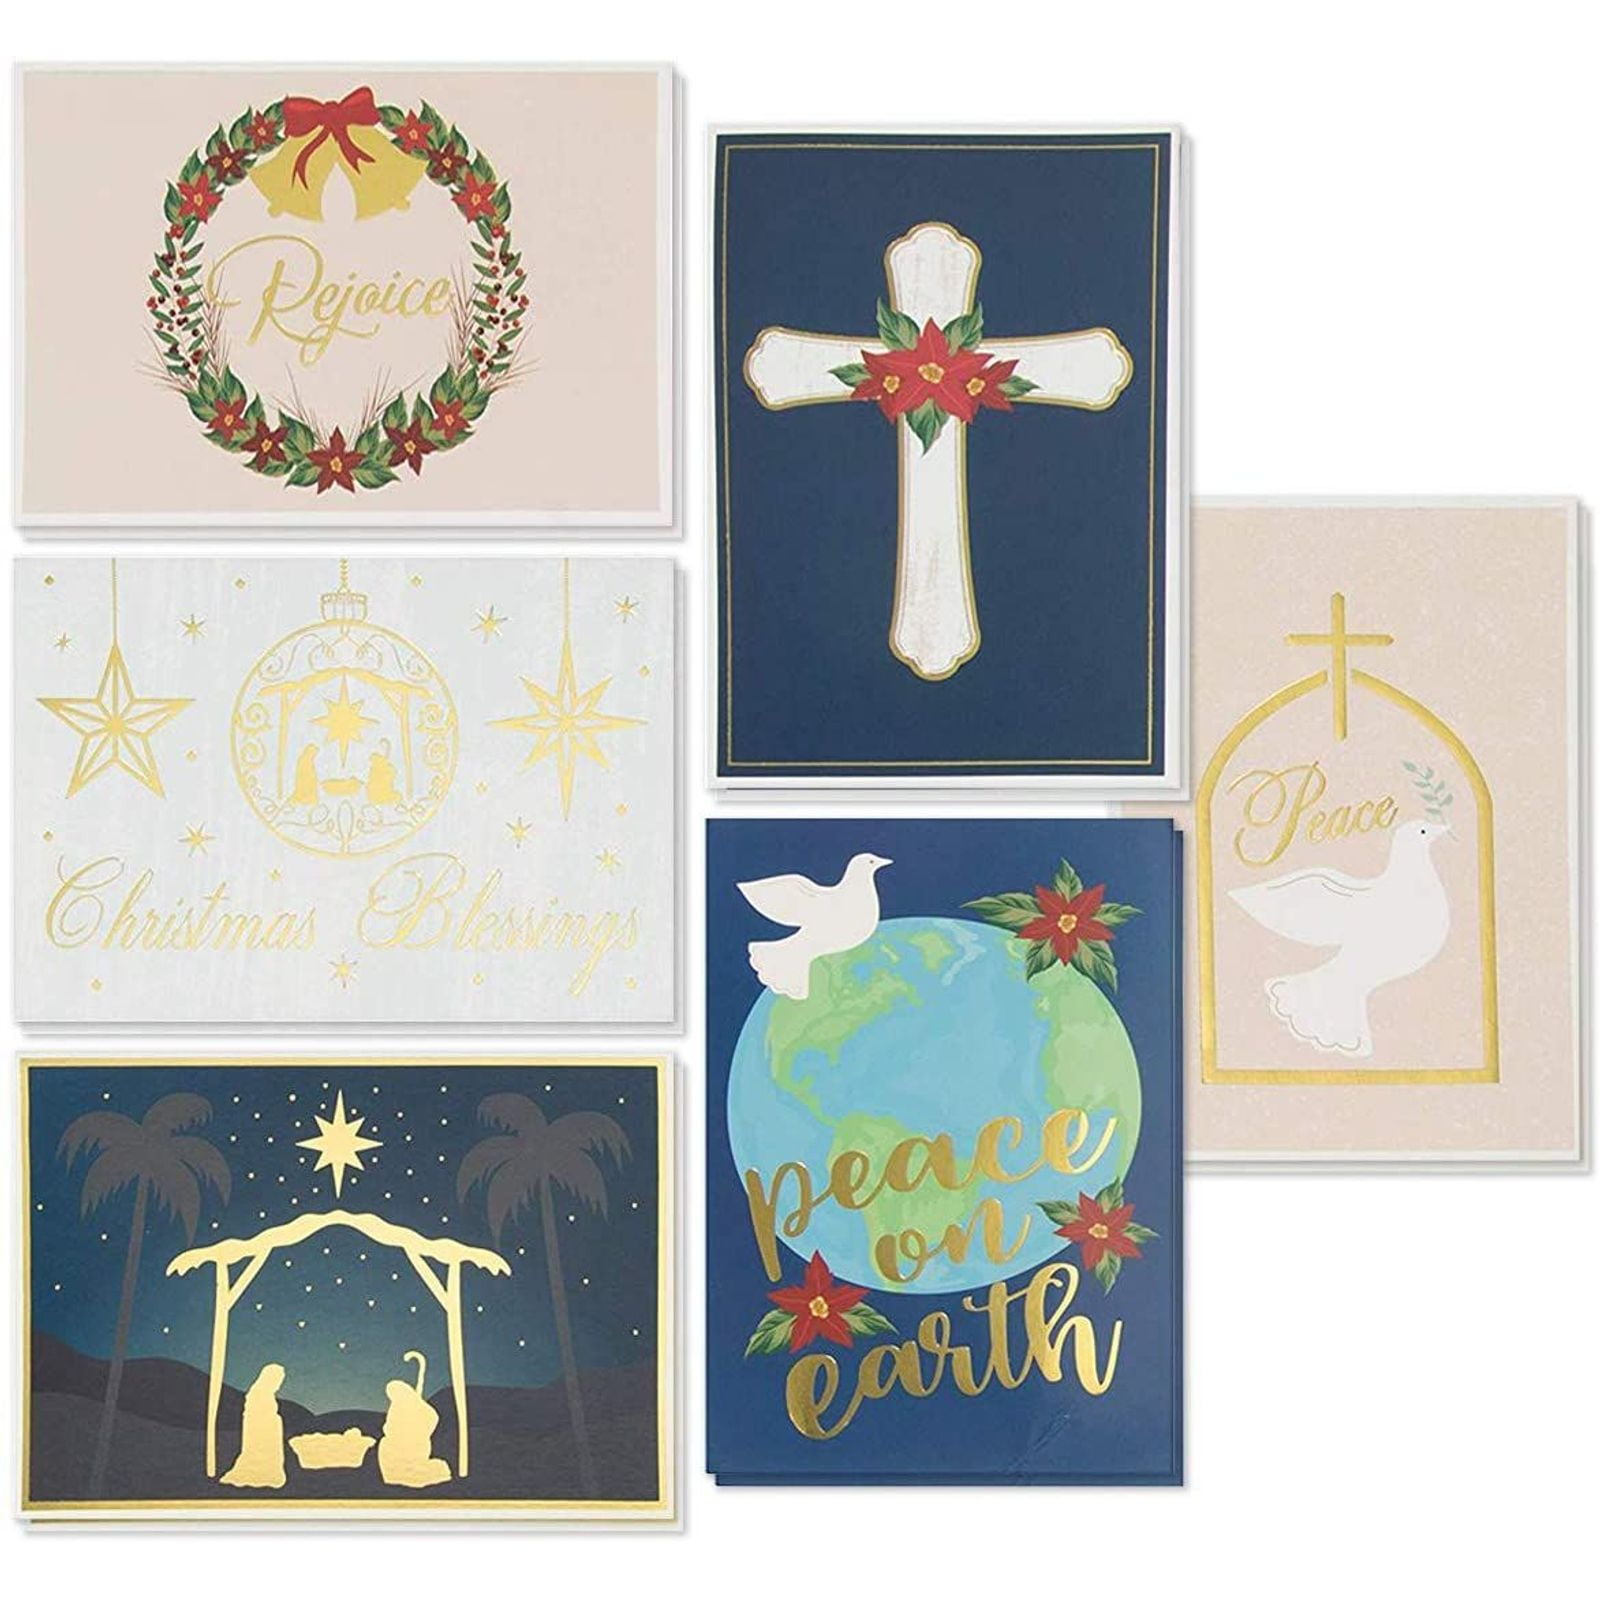 One NEW Religious Christmas Card & Envelope Peace on Earth 3 Kings 